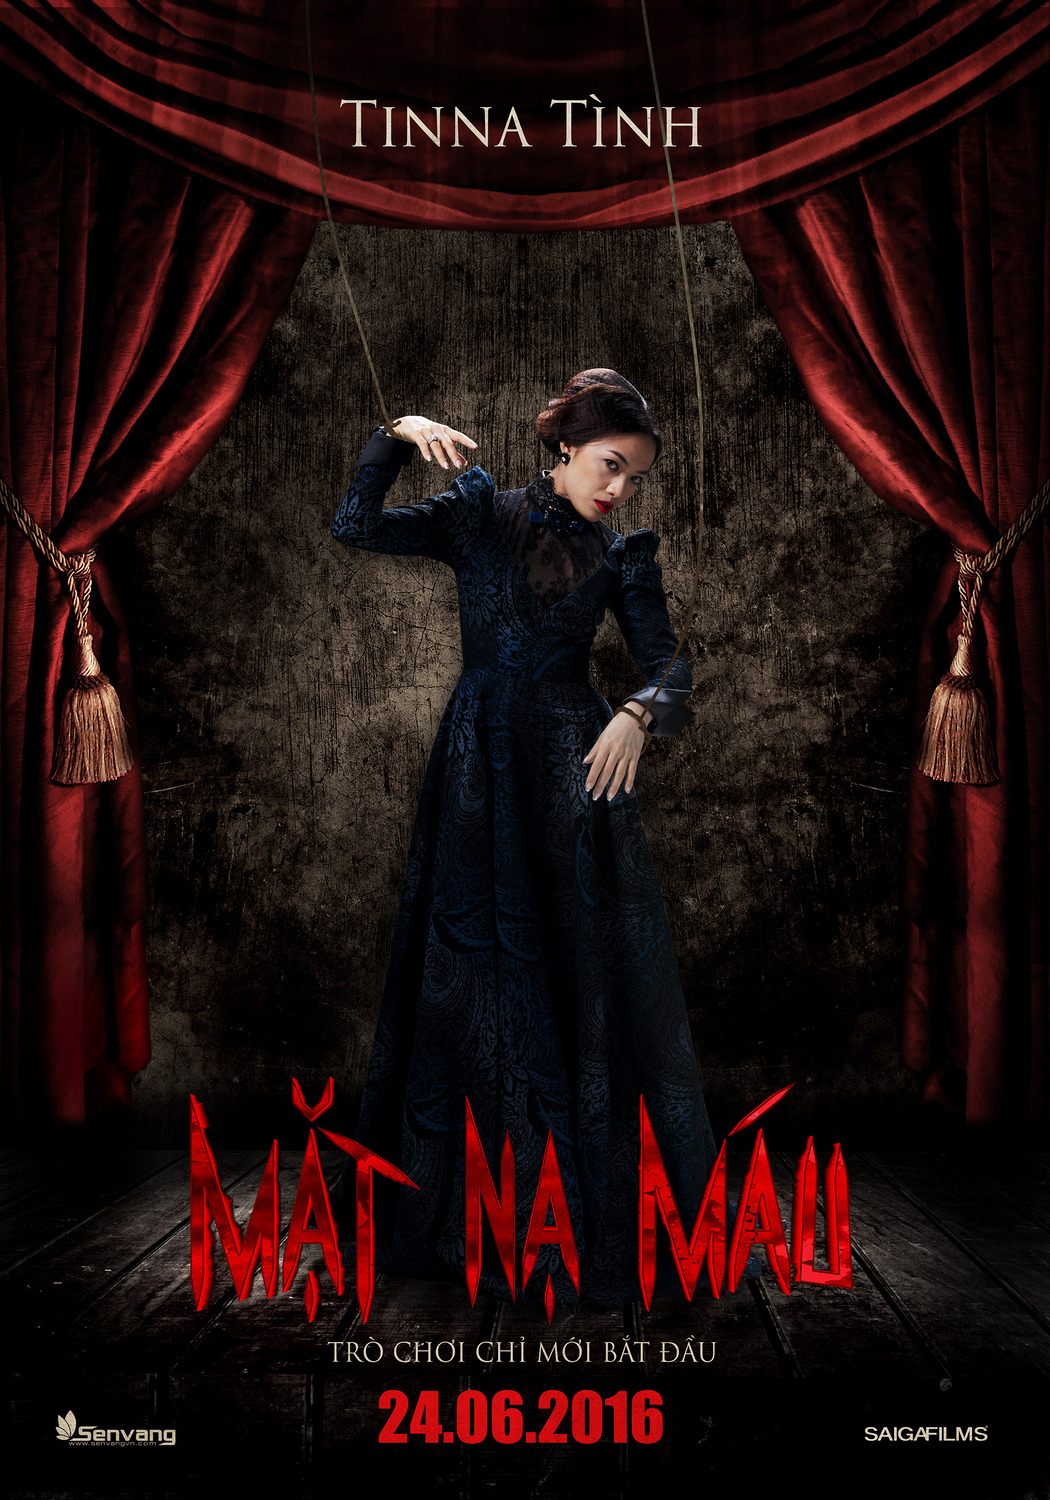 Extra Large Movie Poster Image for Mat Na Mau (#10 of 10)